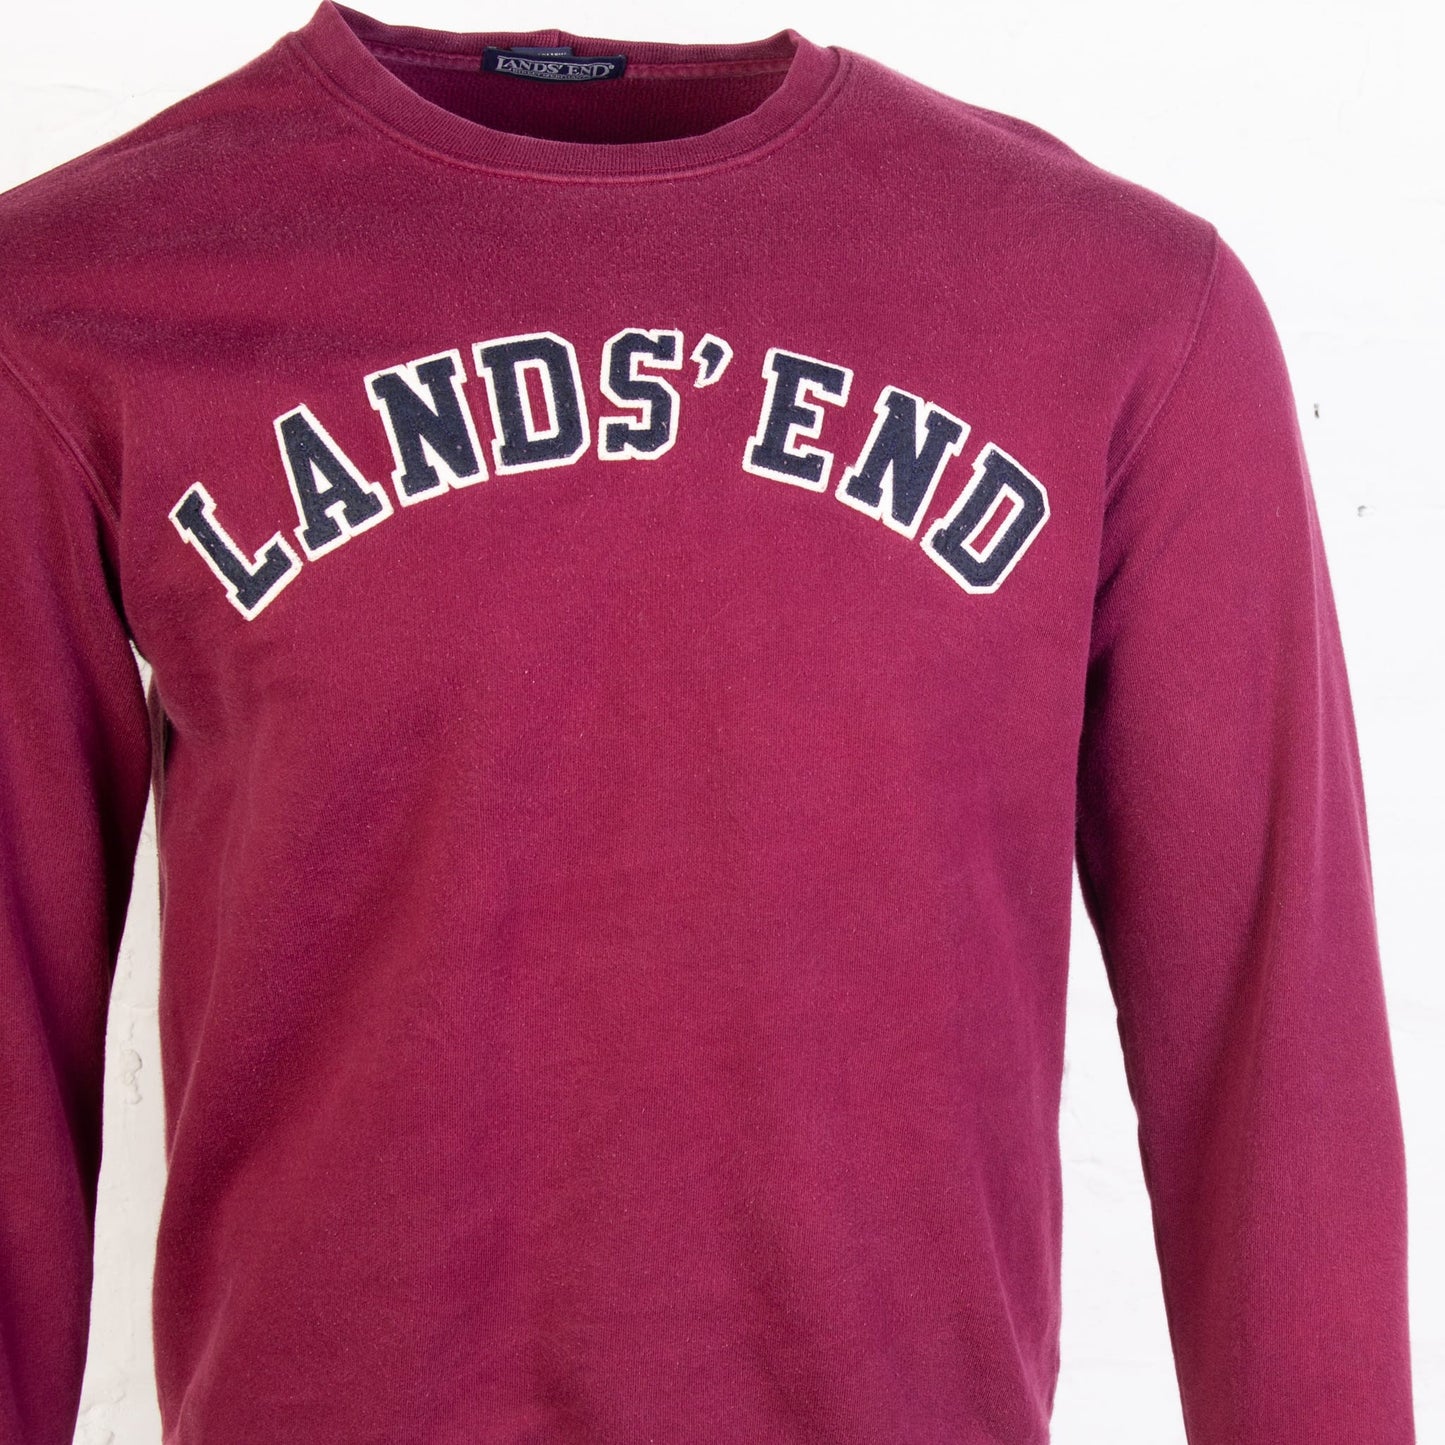 Vintage 'Lands' End' Graphic Sweatshirt - Red - American Madness